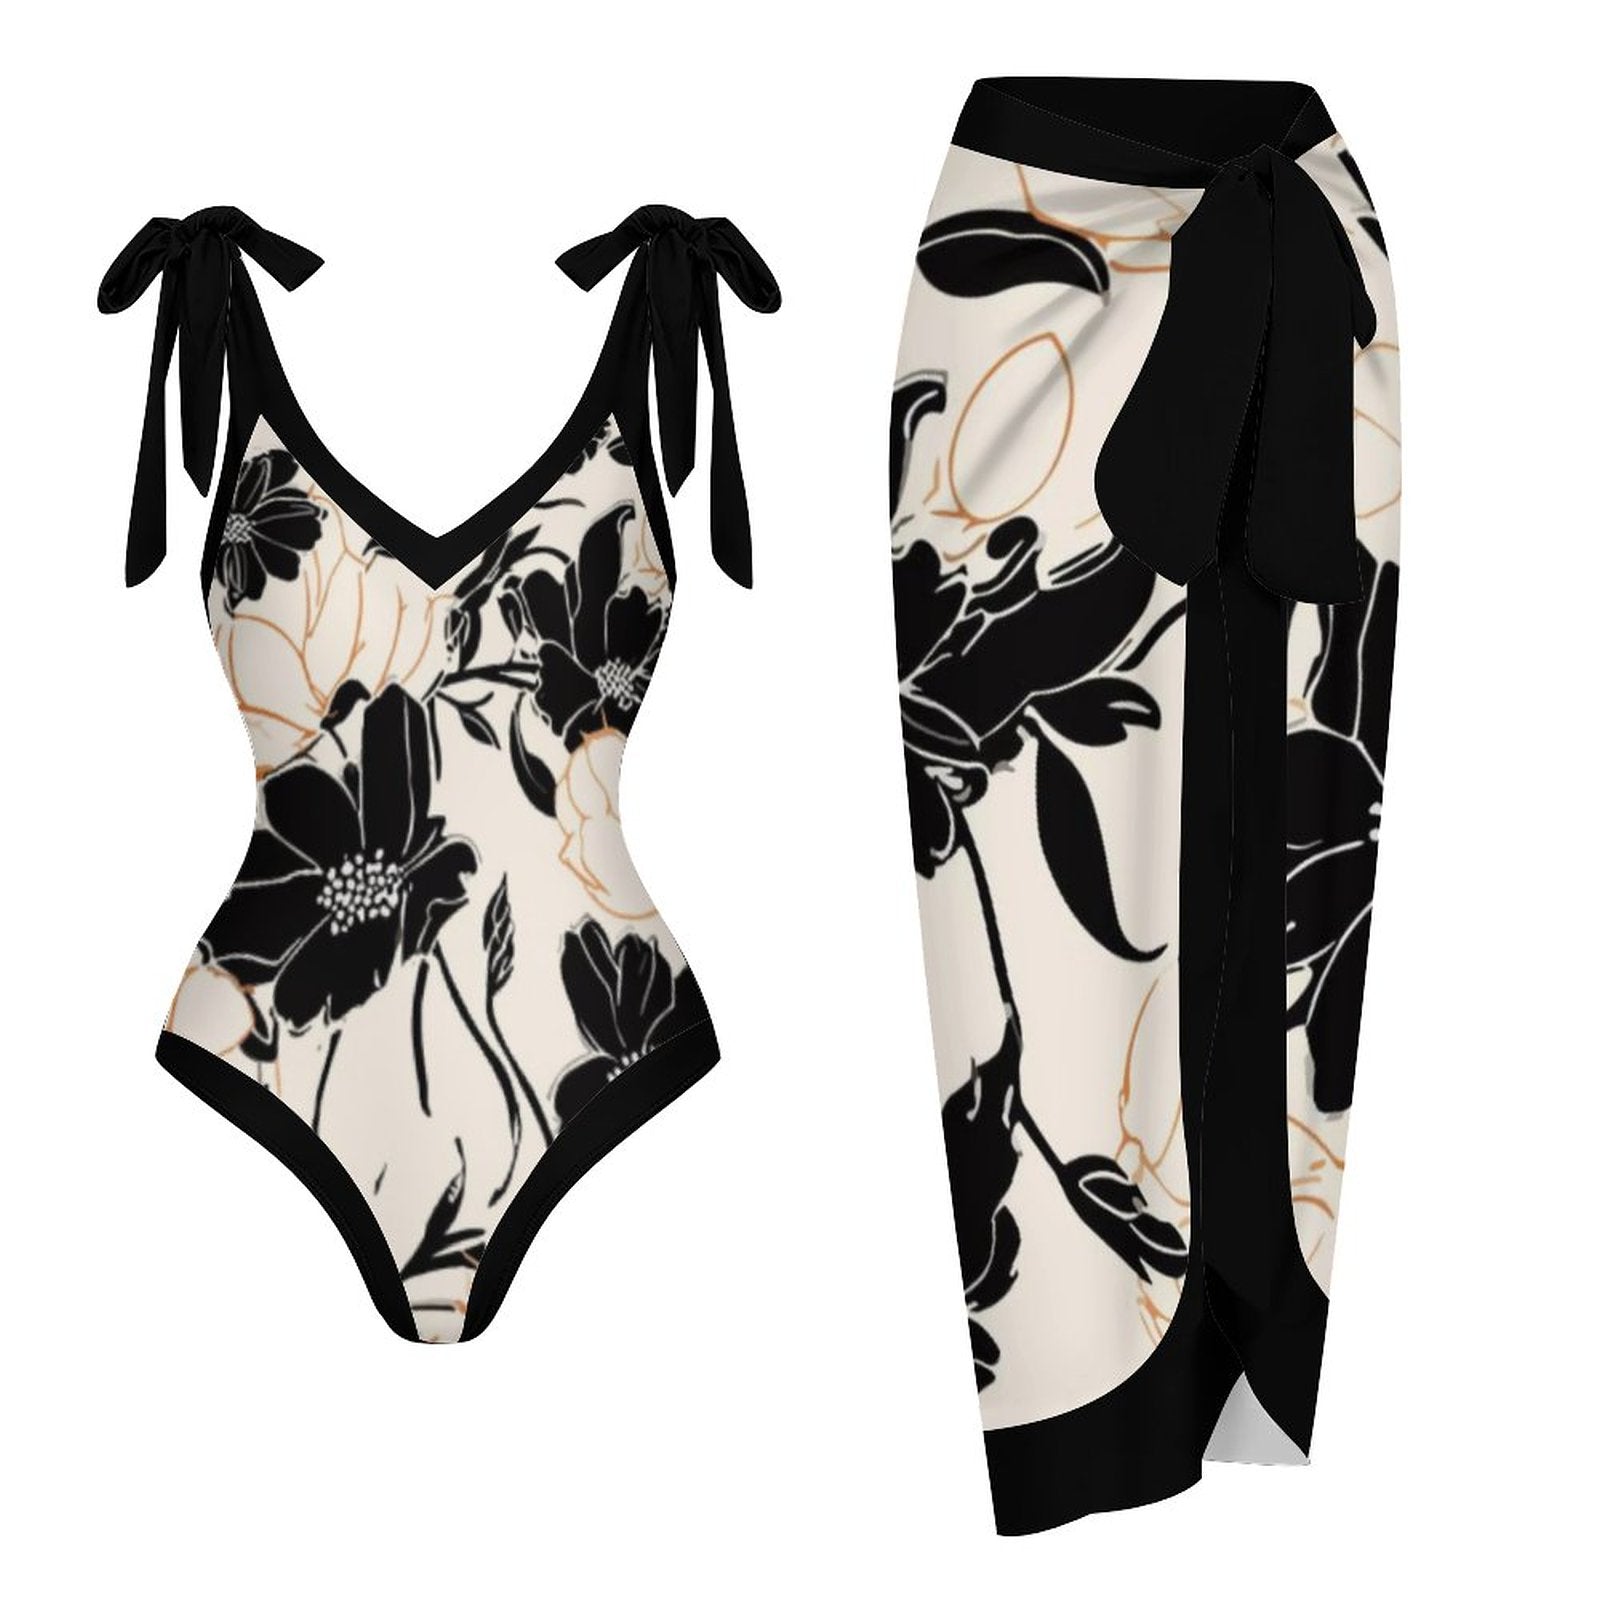 Casual Printed One Piece Swimsuit And Cover Up 2305104923